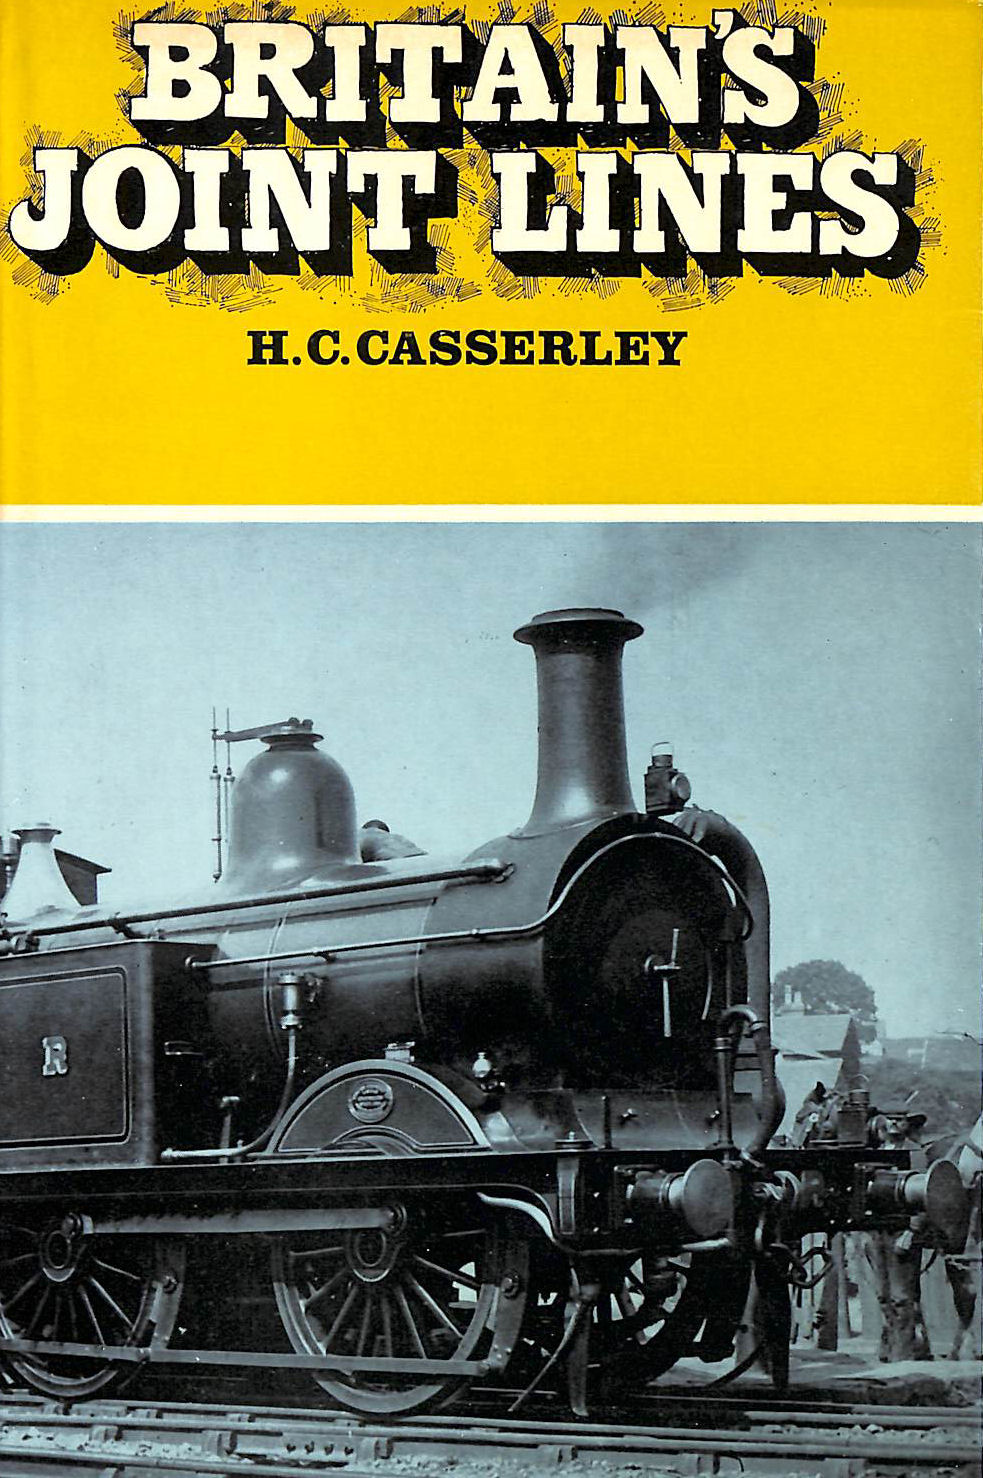 CASSERLEY, H.C. - Britain's Joint Lines